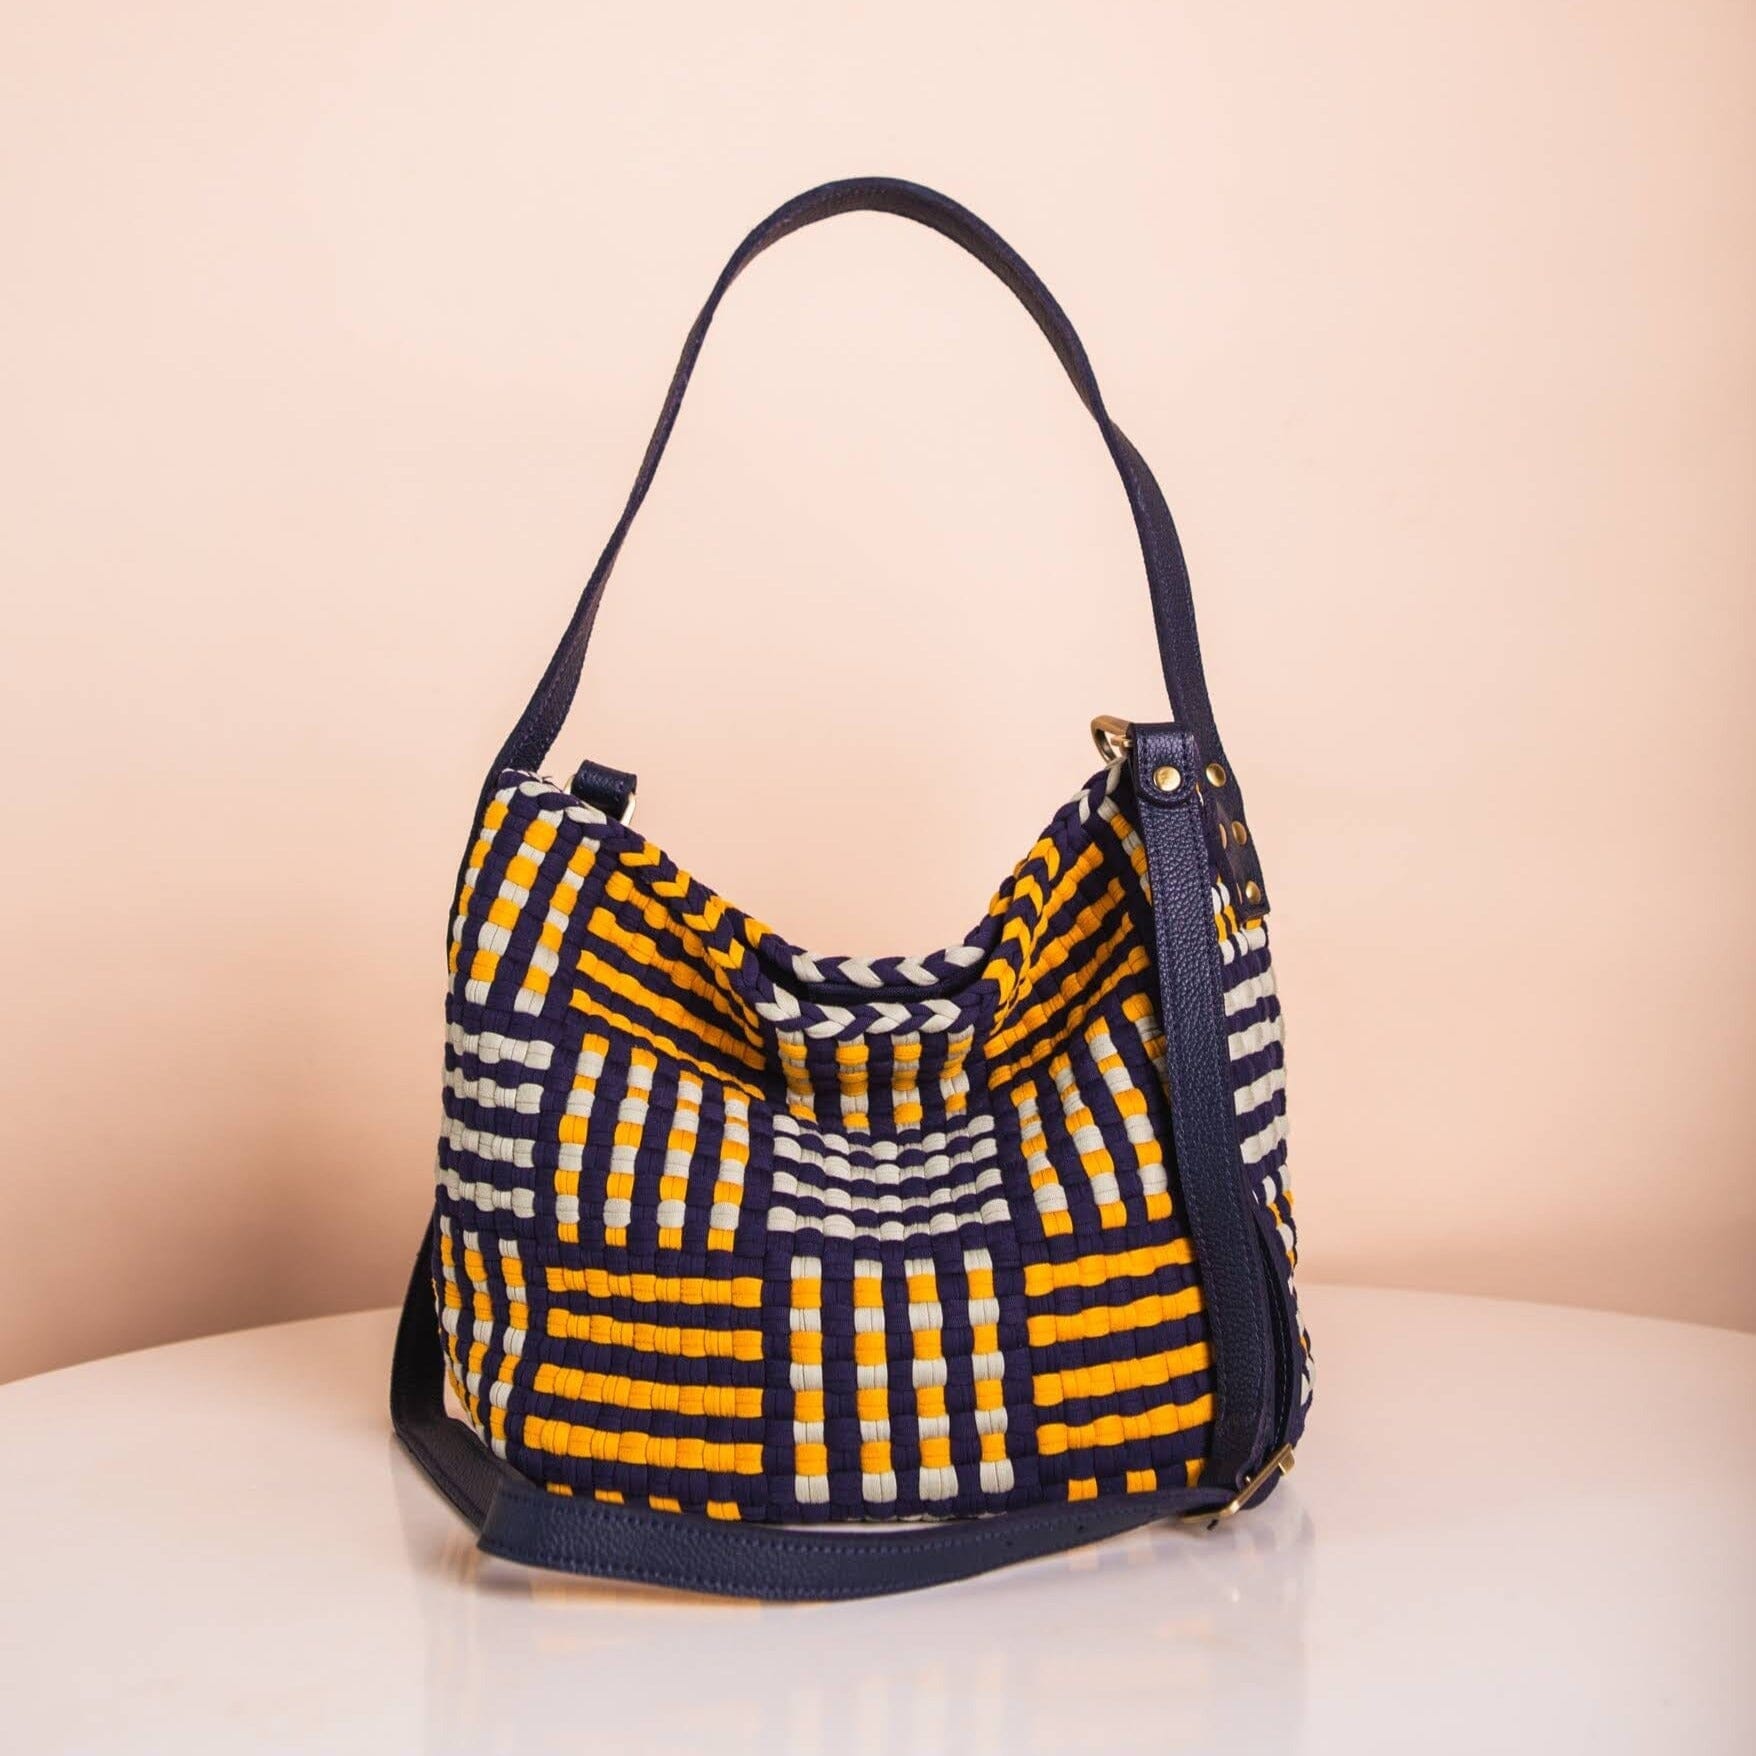 Buslo Mini Mat Pattern Navy & Yellow with Longer Handle Fashion Rags2Riches